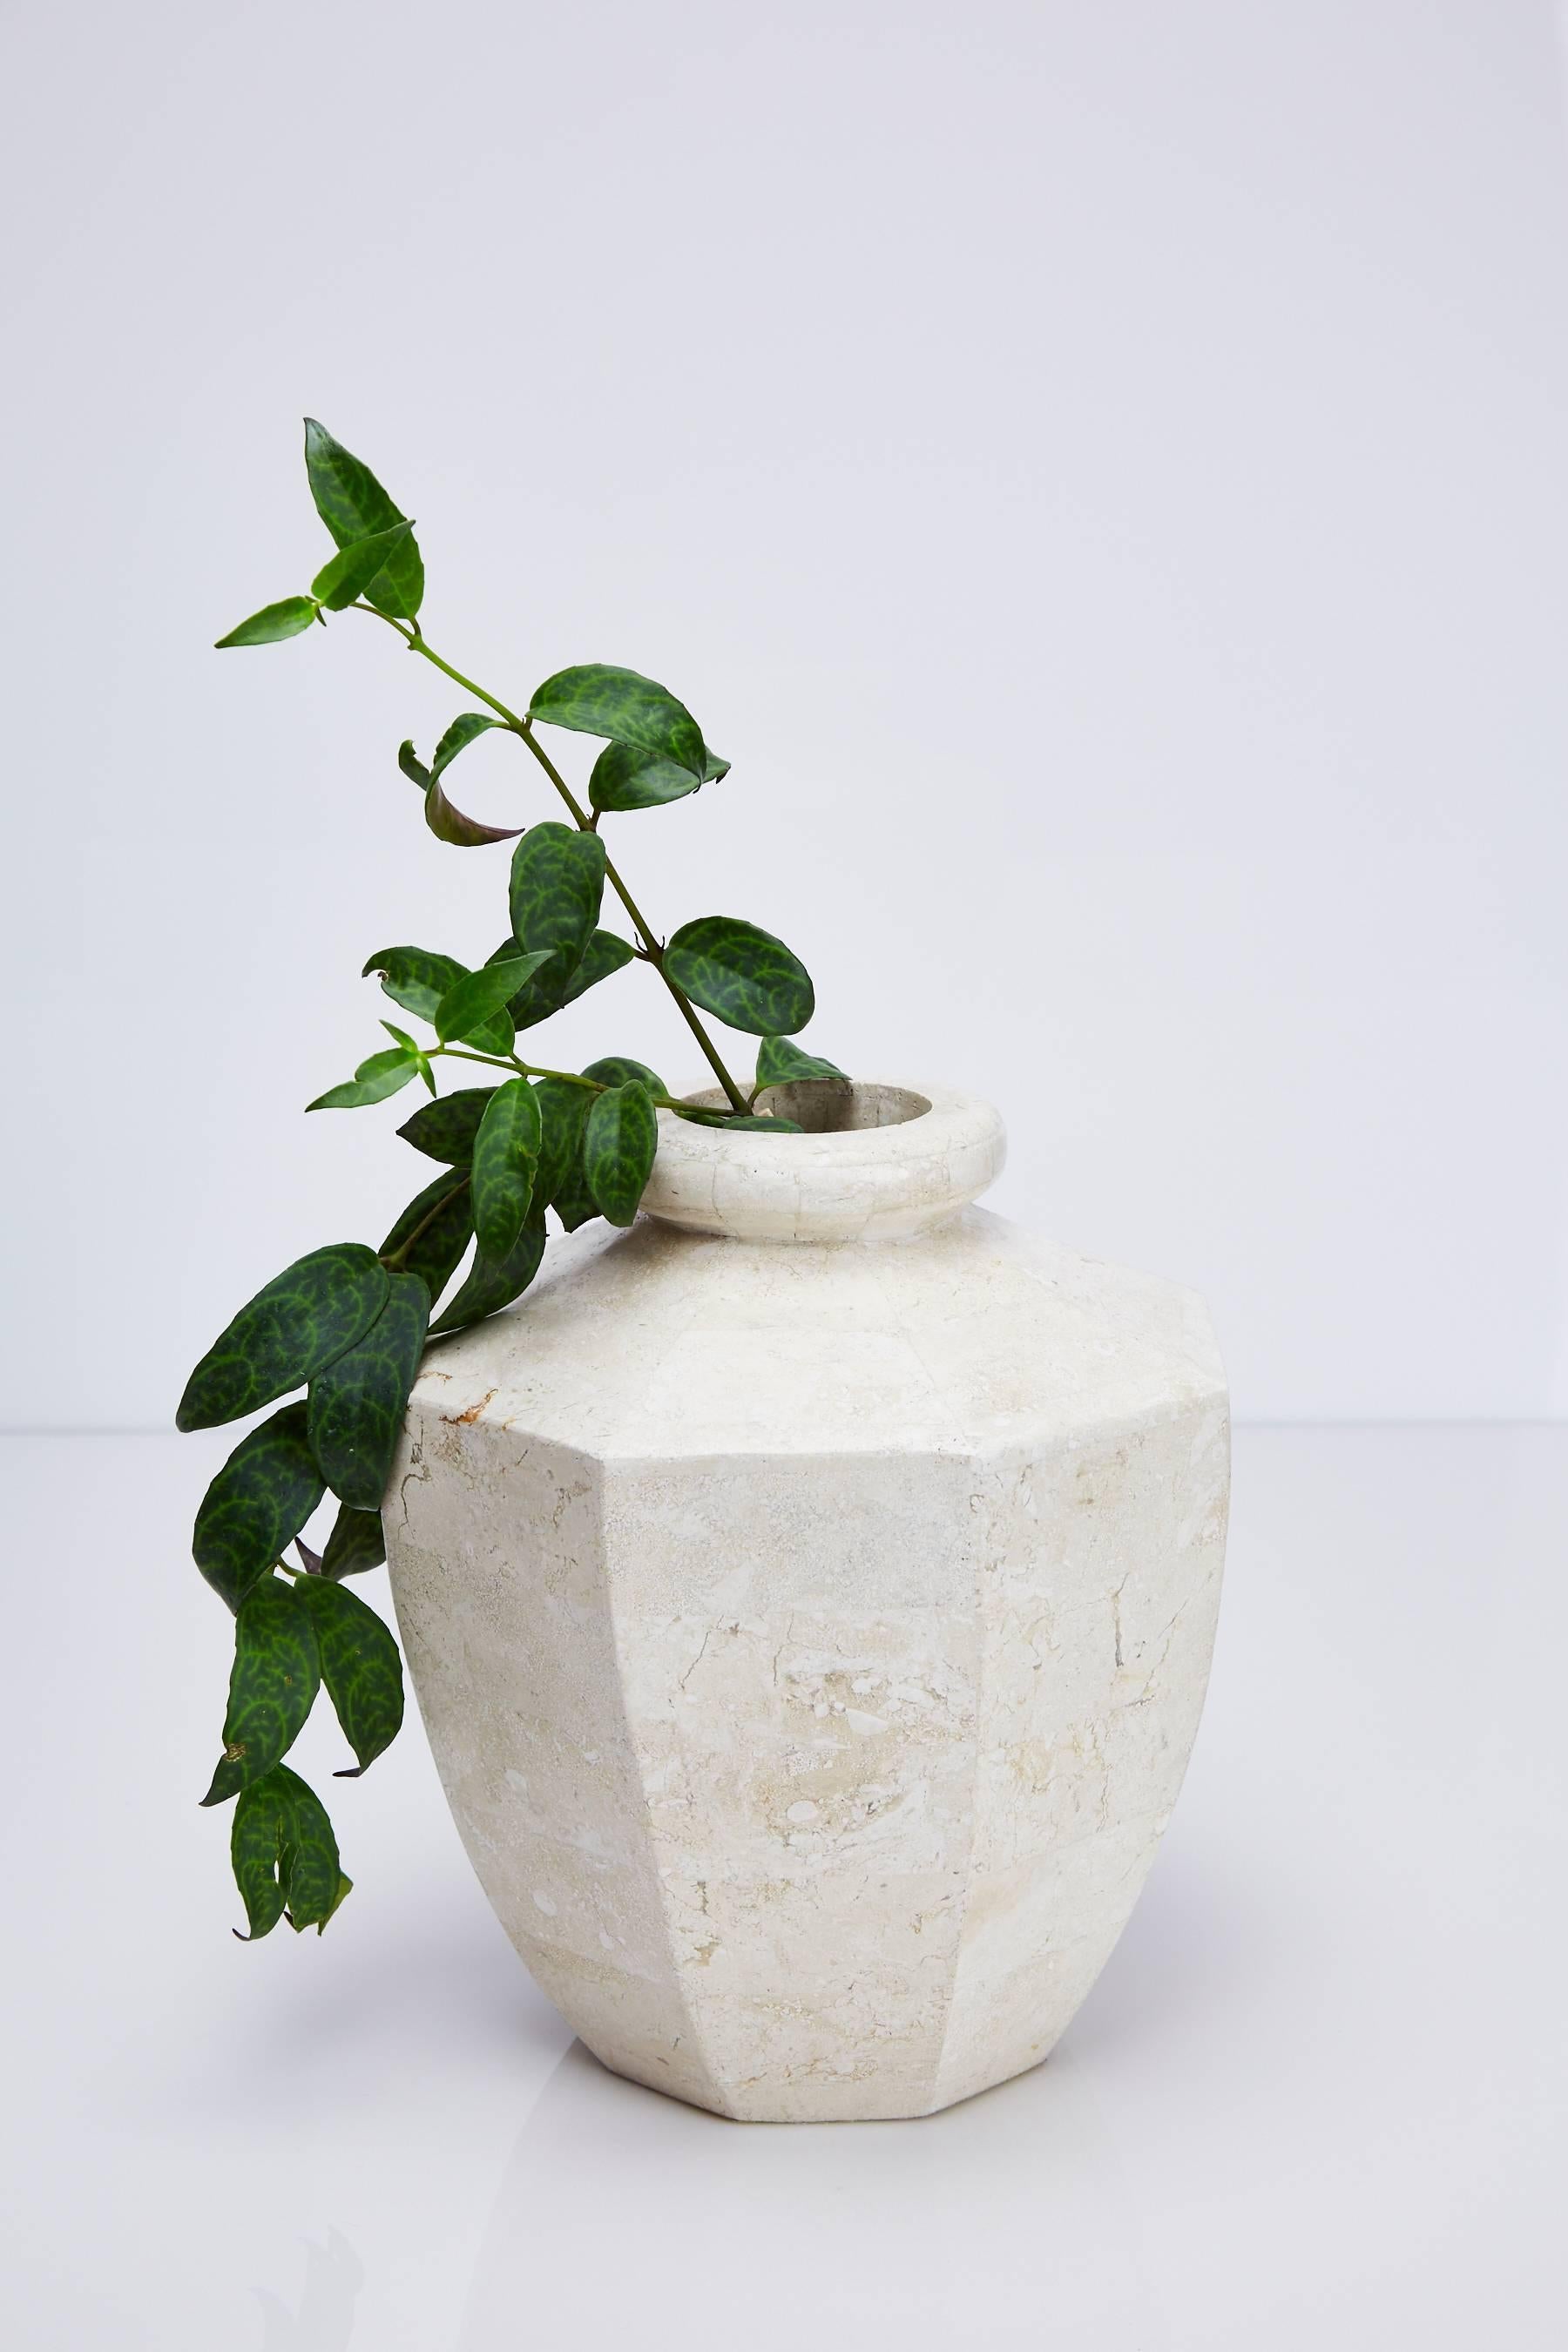 Short octagon flower vase executed in tessellated white ivory stone over a fiberglass body.